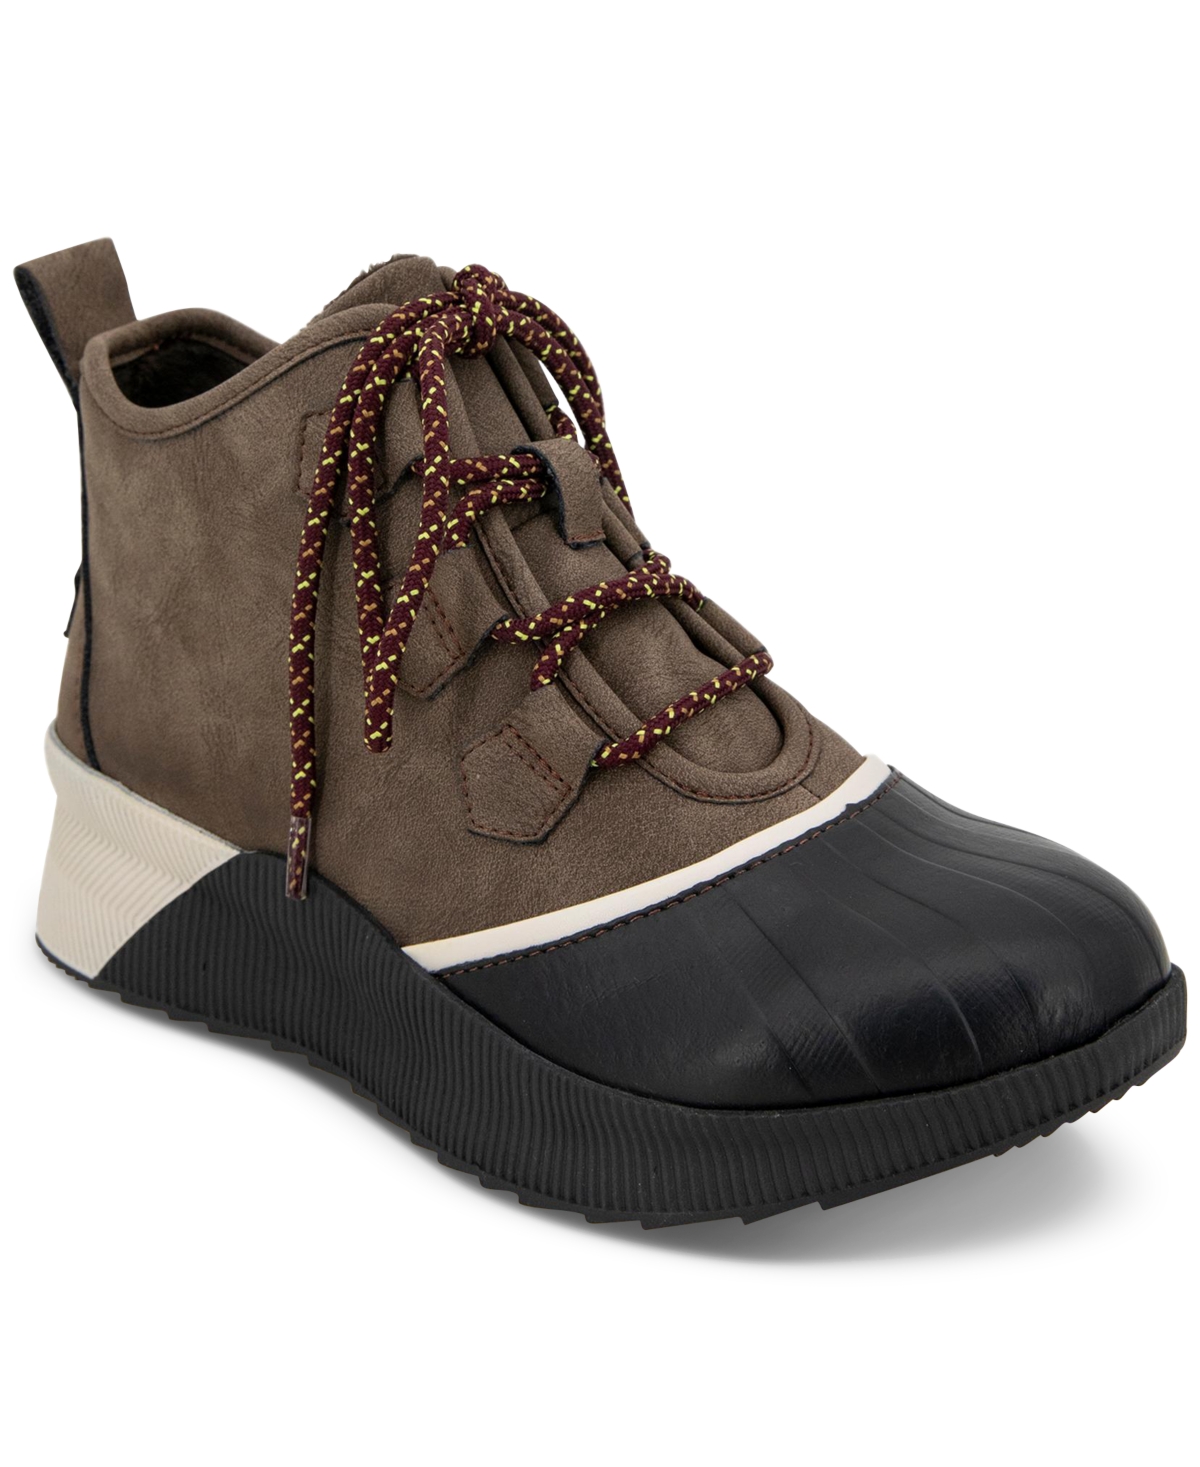 Women's Linette Lace-Up Water-Resistant Duck Booties - Taupe